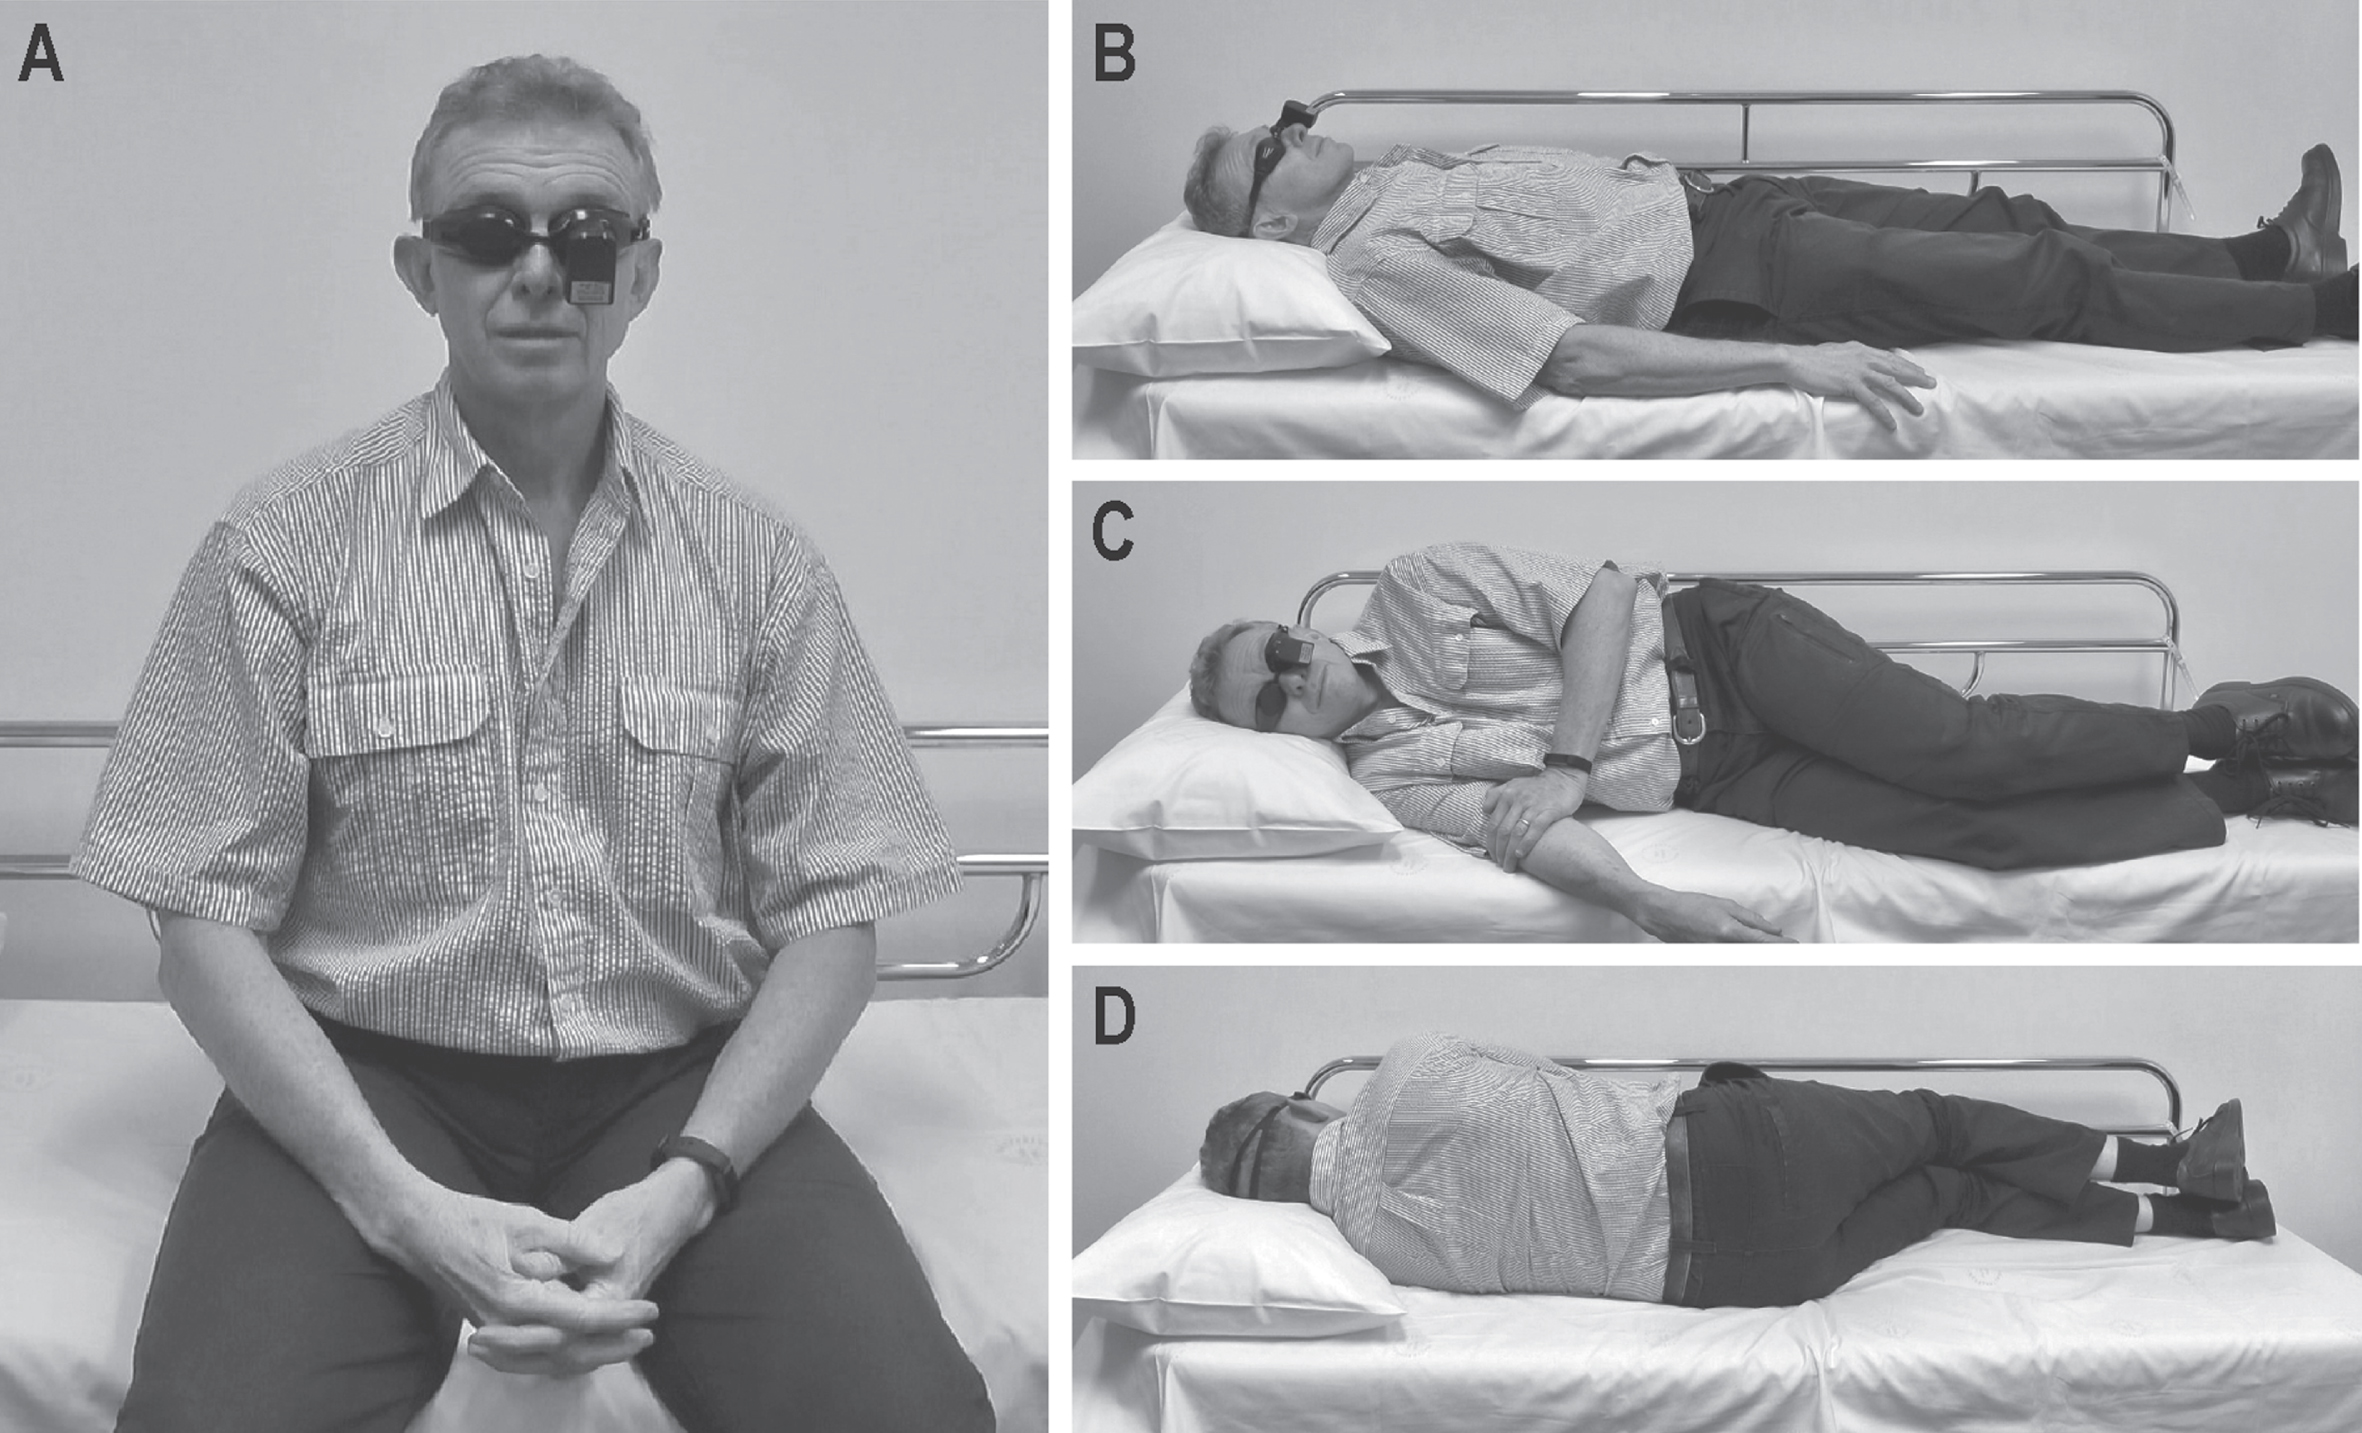 Positions conducted during video-oculography; A) sitting upright, B) supine, C) right-lateral, and D) left-lateral.